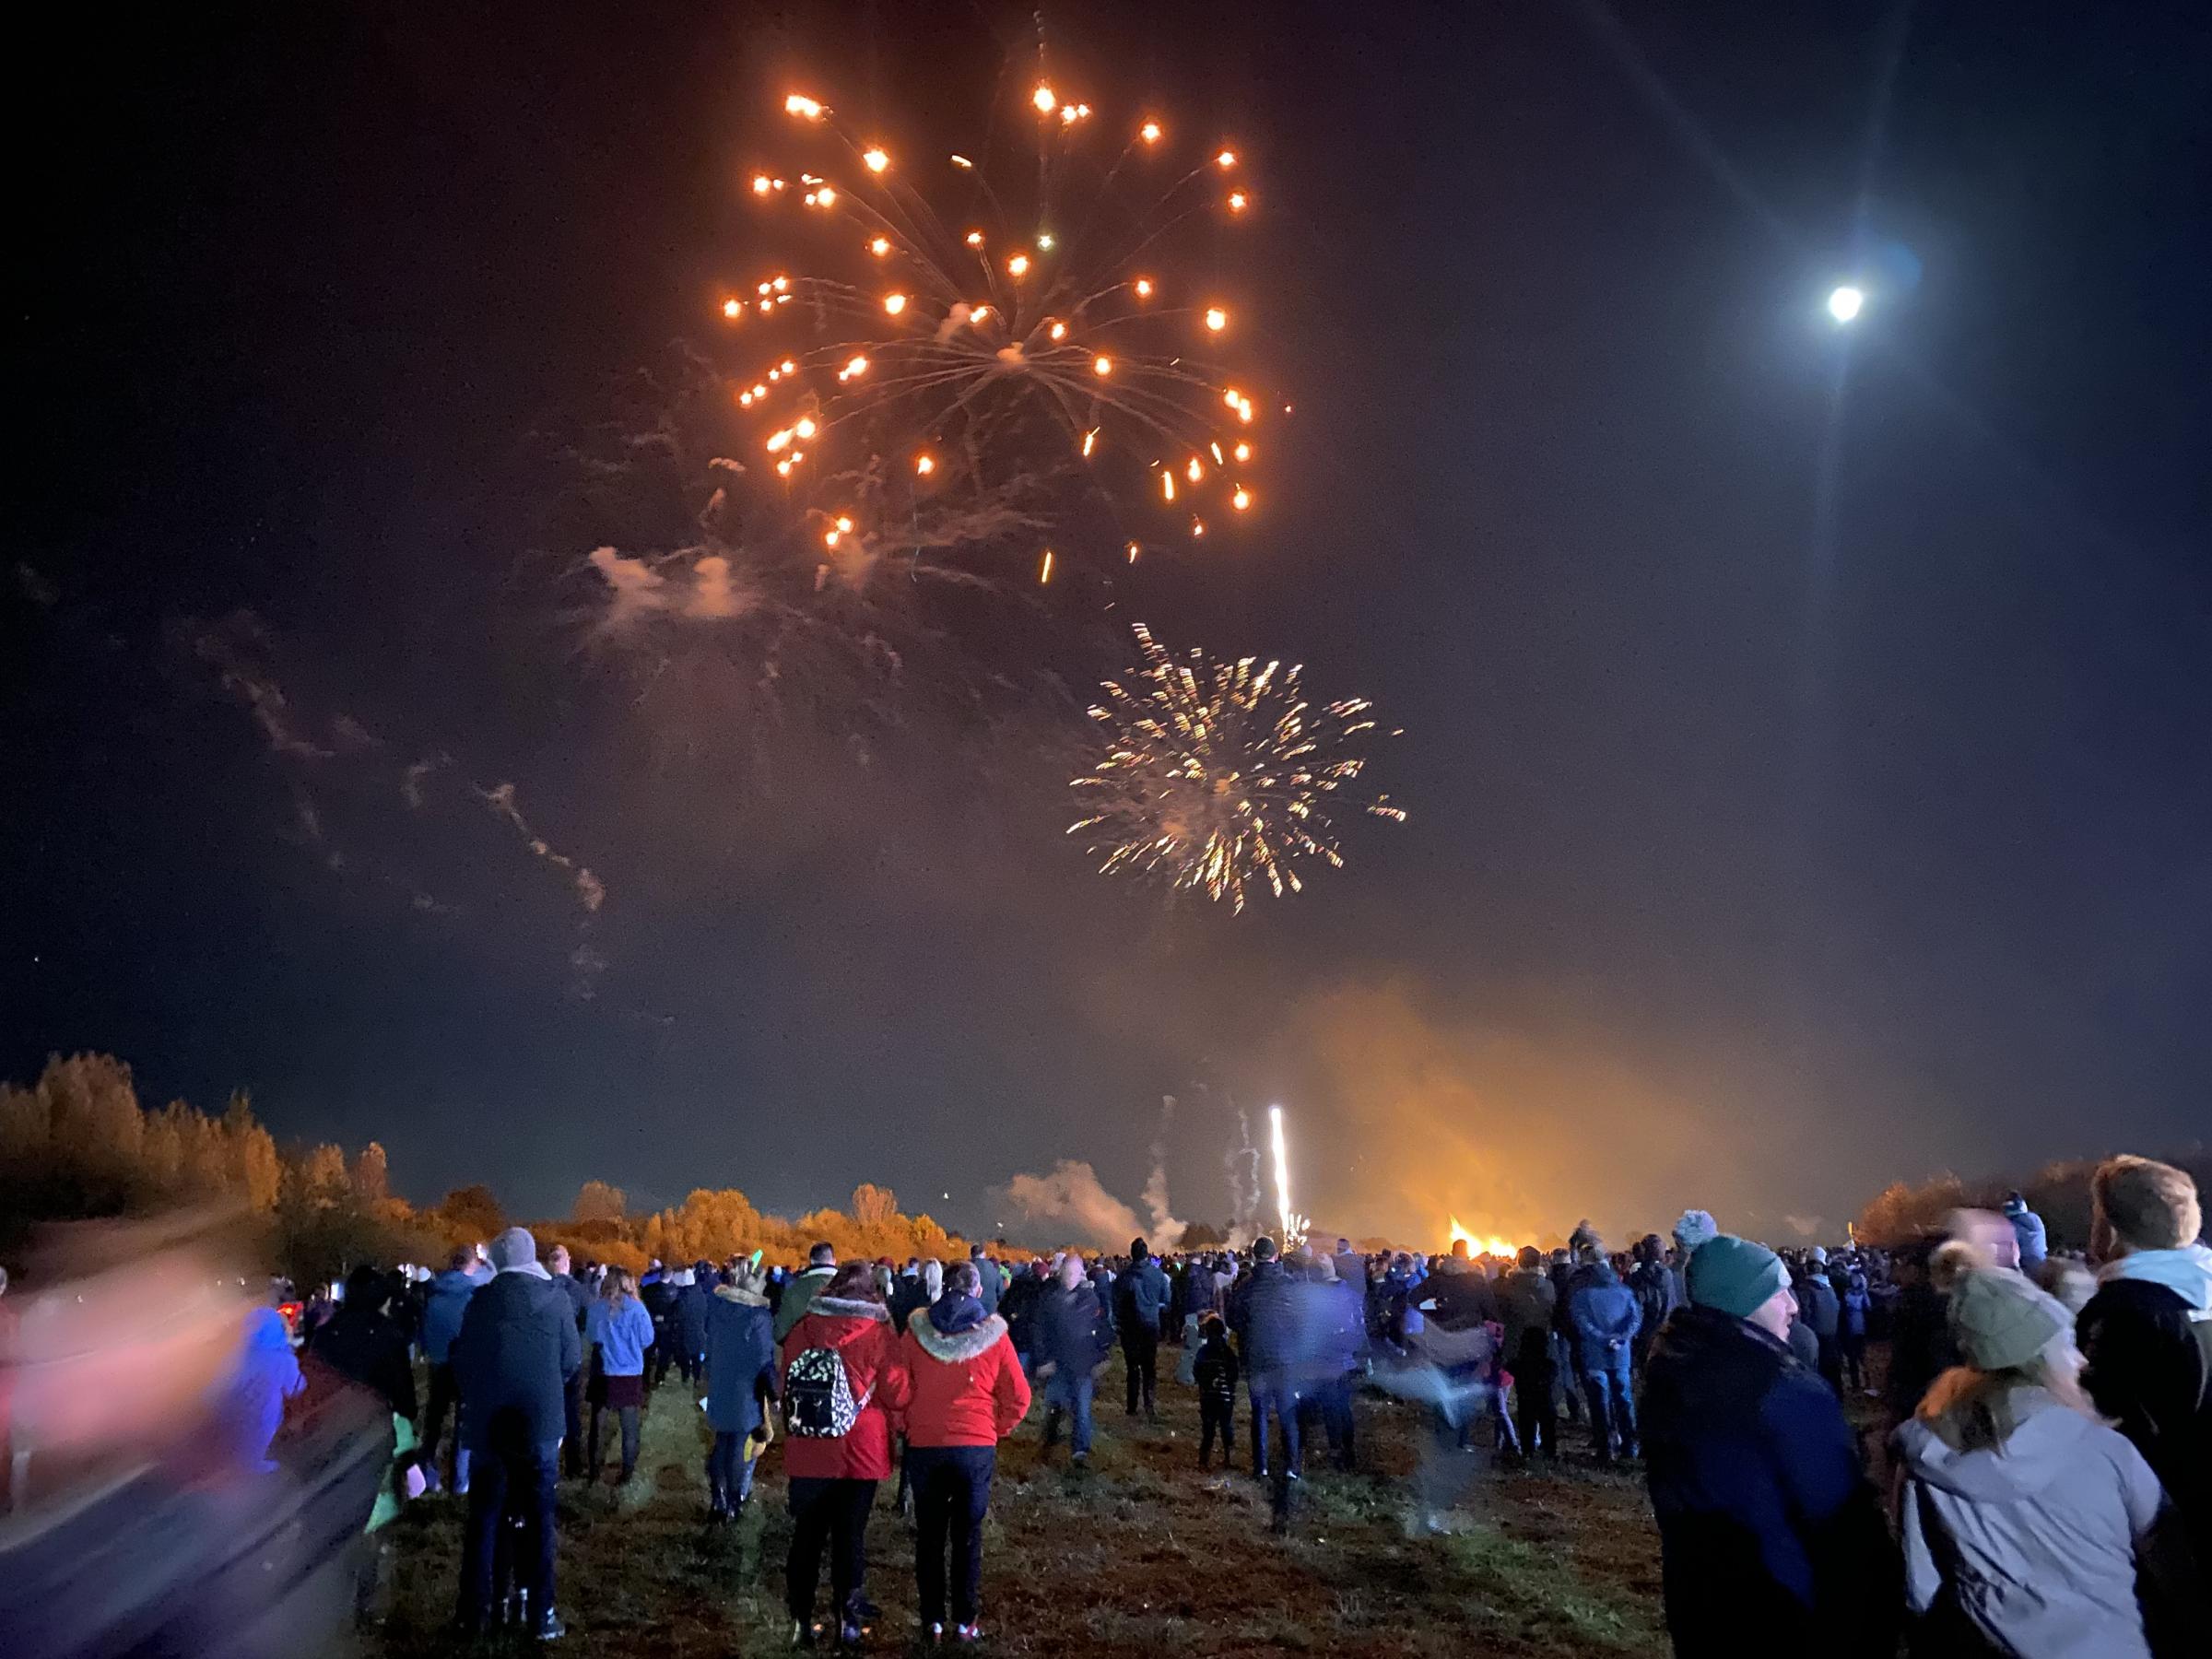 Hundreds of people watched the fireworks at the Hereford Livestock Market